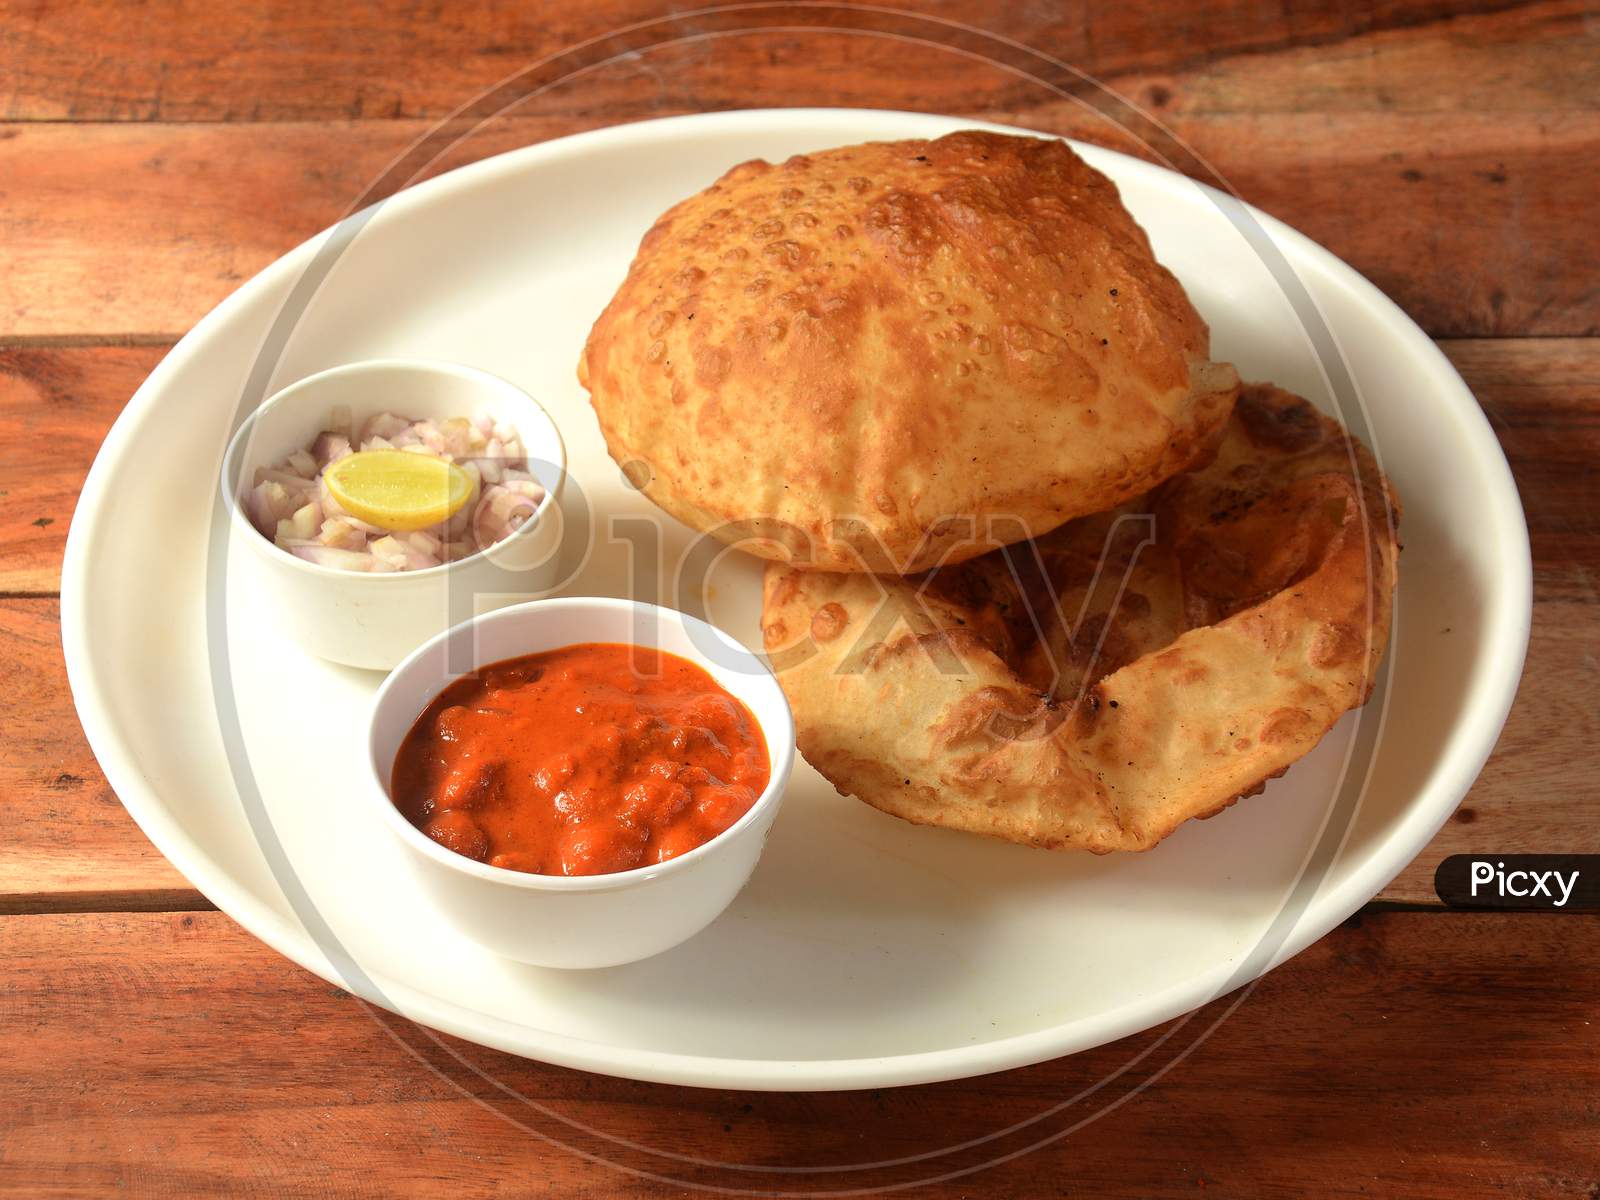 Chole Bhature, Spicy Chick Peas Curry Also Known As Chole Or Channa Masala Is Traditional North Indian Main Course Recipe And Usually Served With Fried Puri Or Bhature, Selective Focus